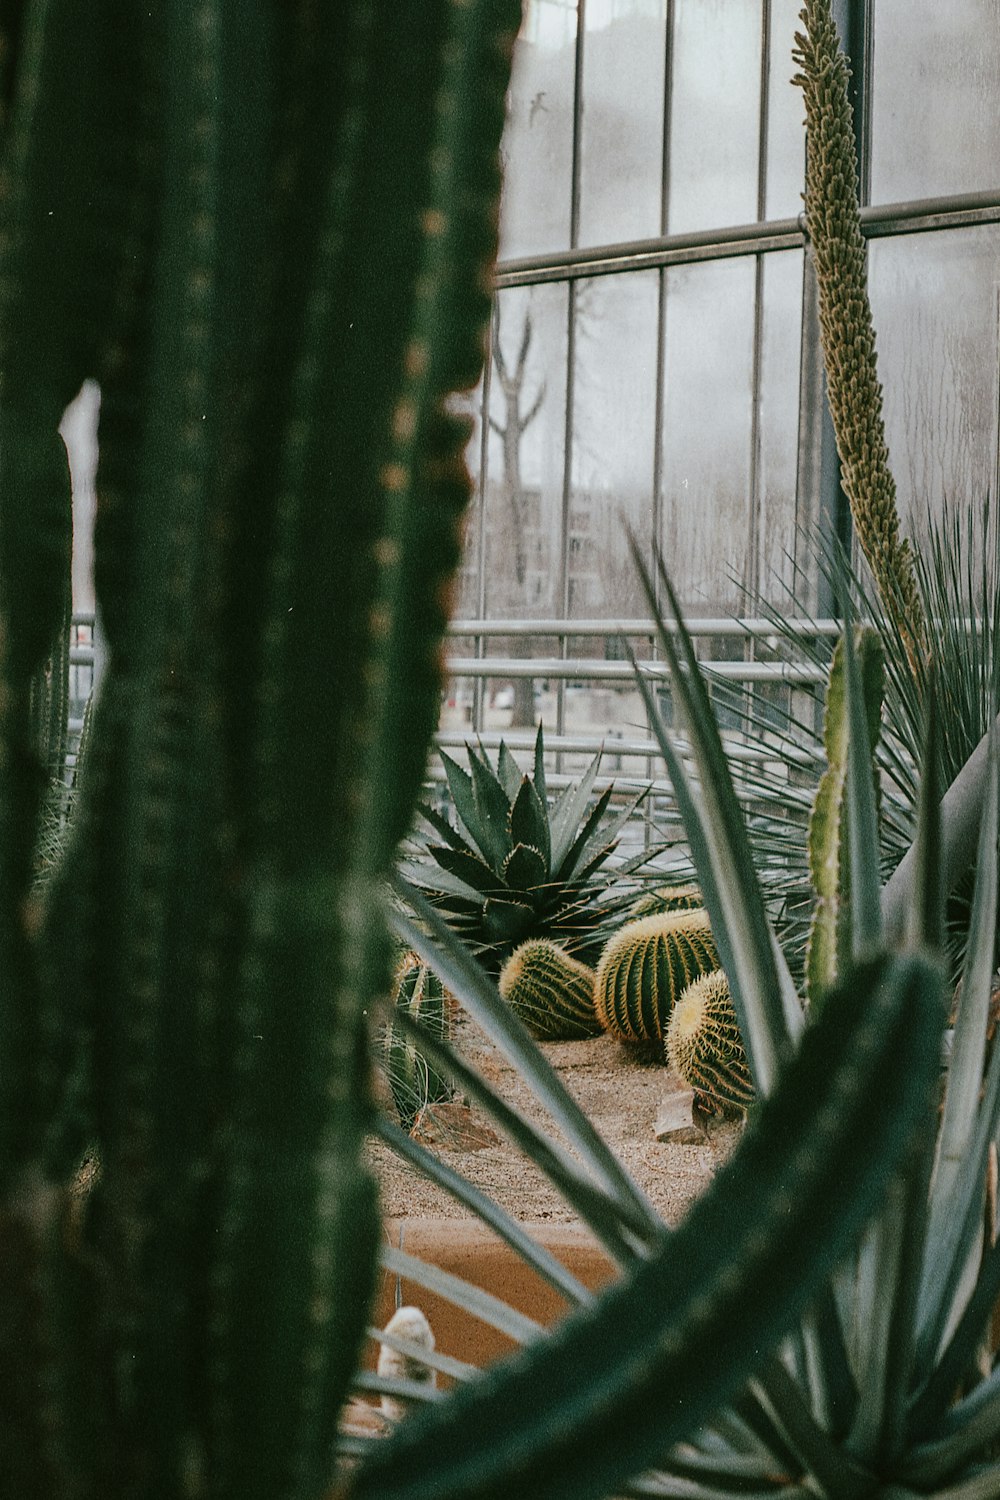 a group of cacti and other plants in a greenhouse